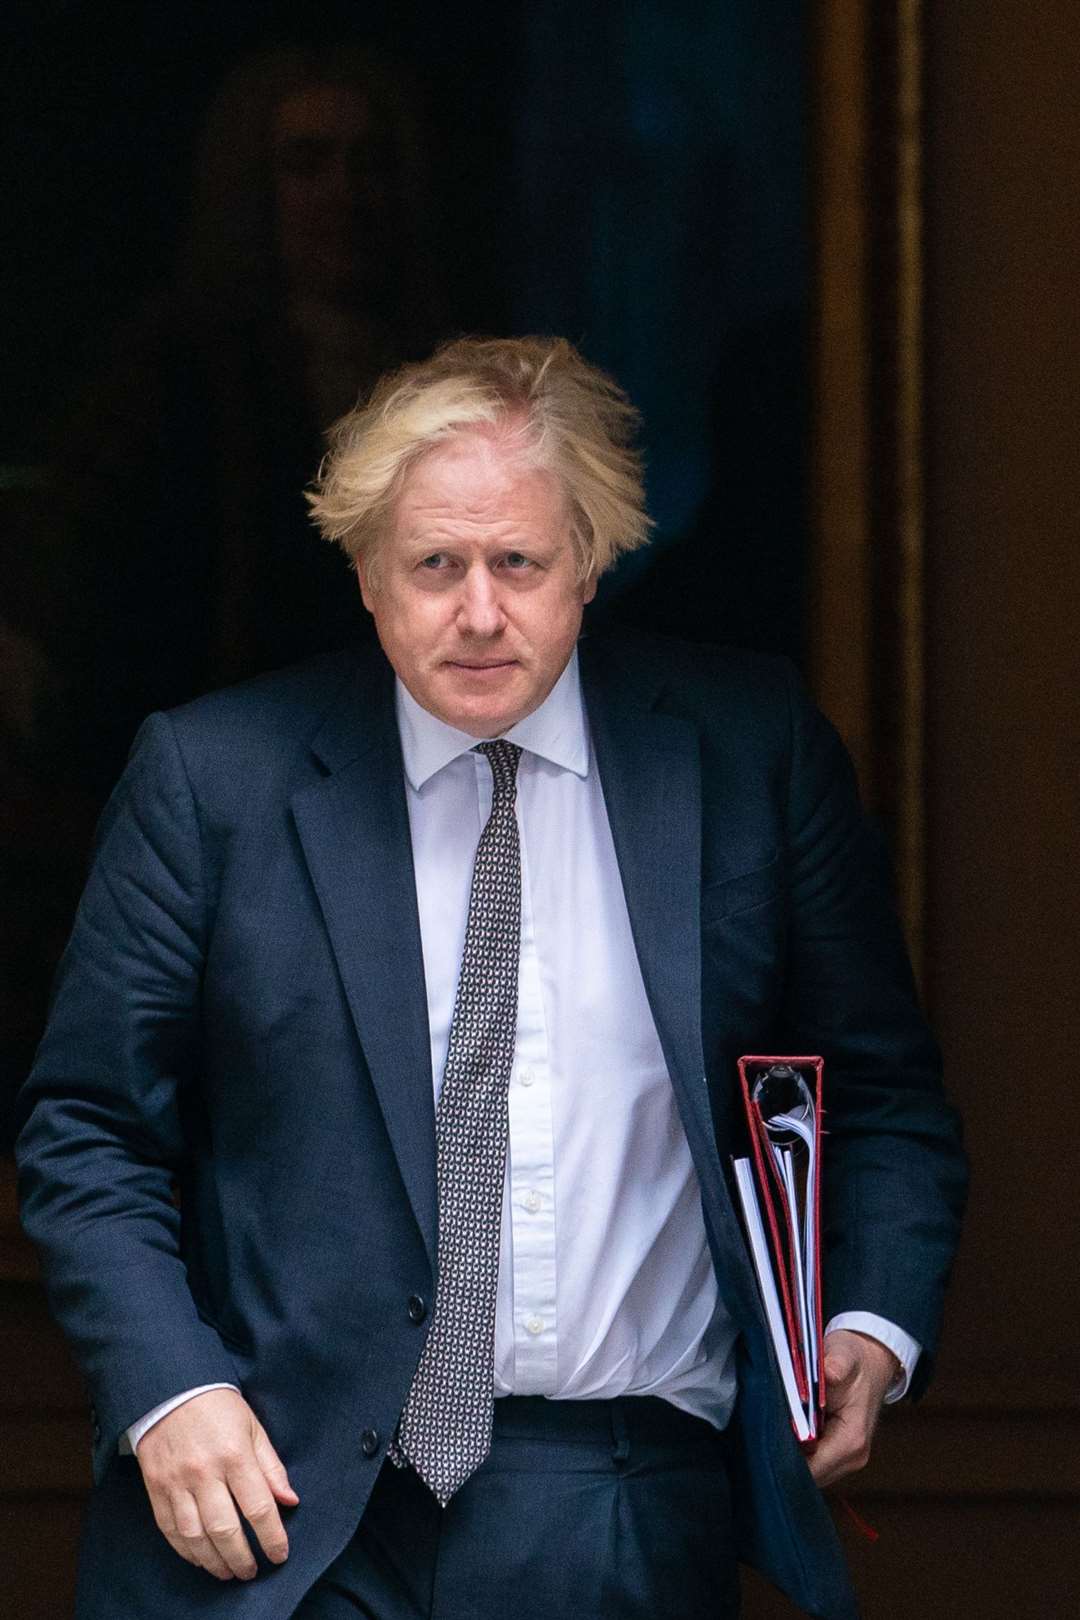 Boris Johnson has said he will use ‘every humanitarian and diplomatic lever’ to protect human rights in Afghanistan (Dominic Lipinski/PA)